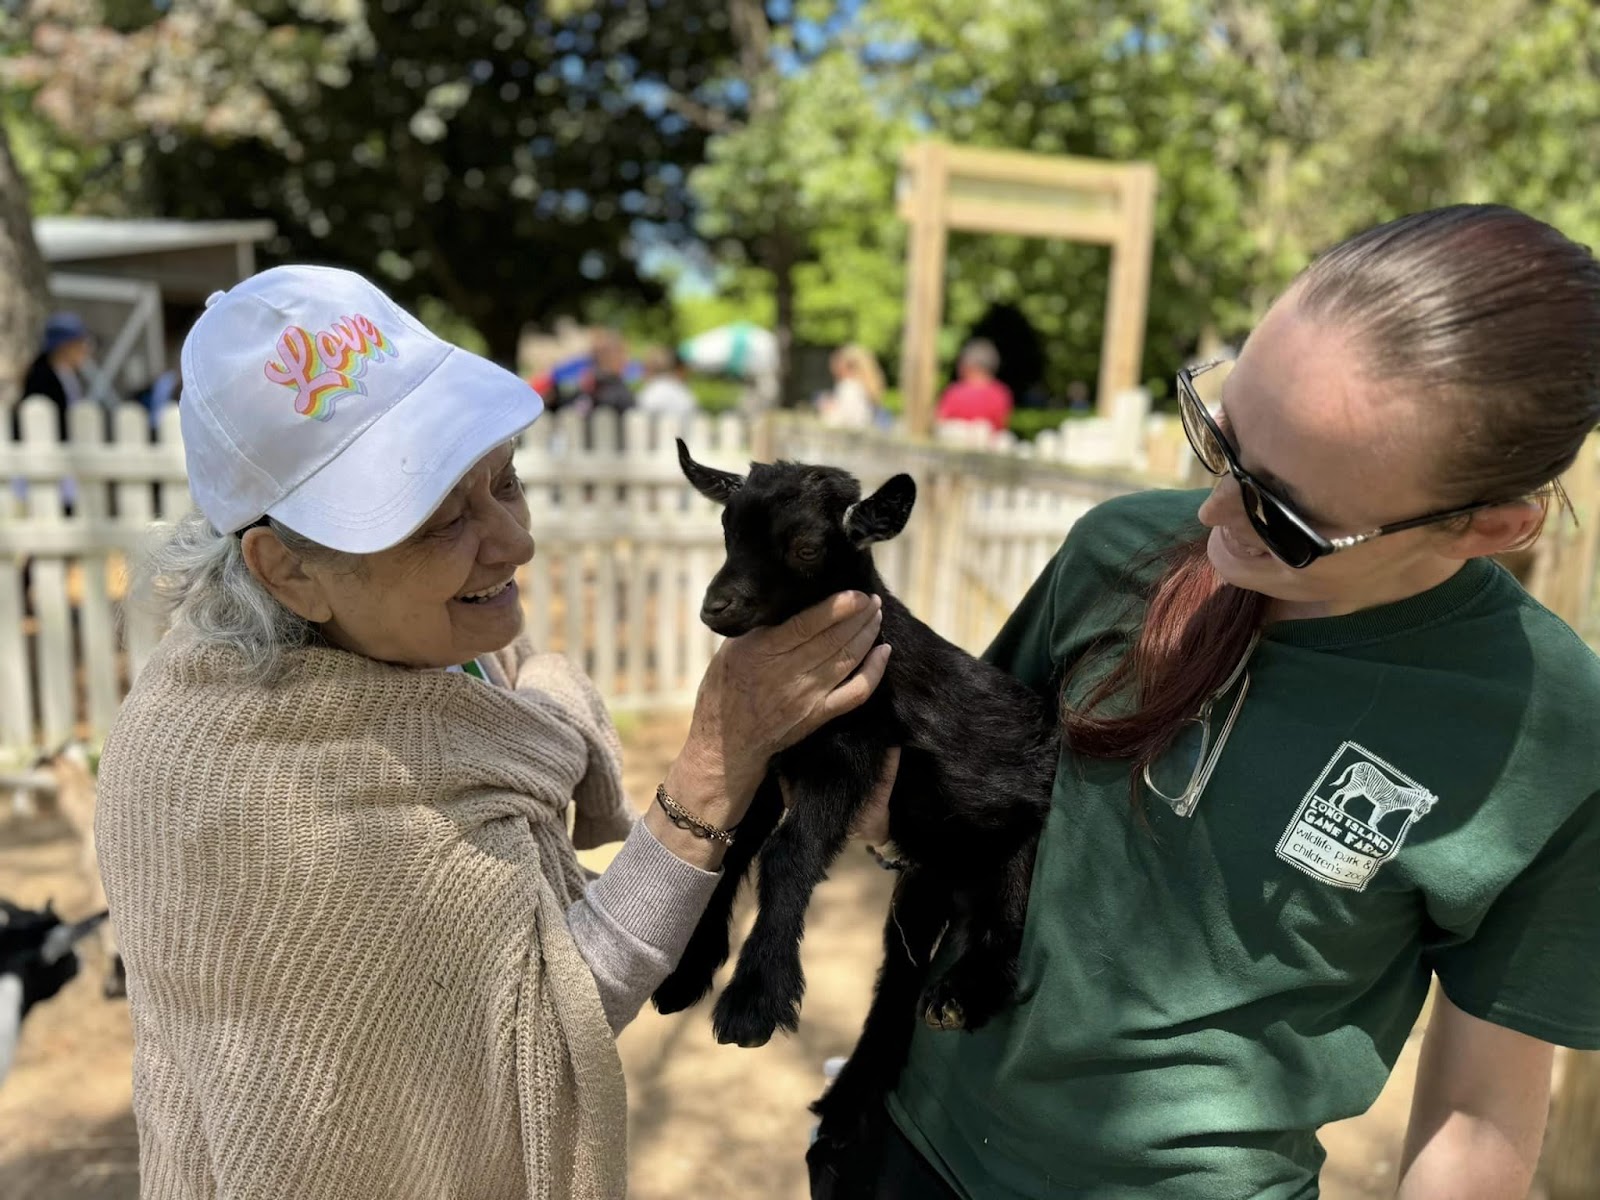 A Village Walk resident petting a baby goat with a Long Island Game Farm employee